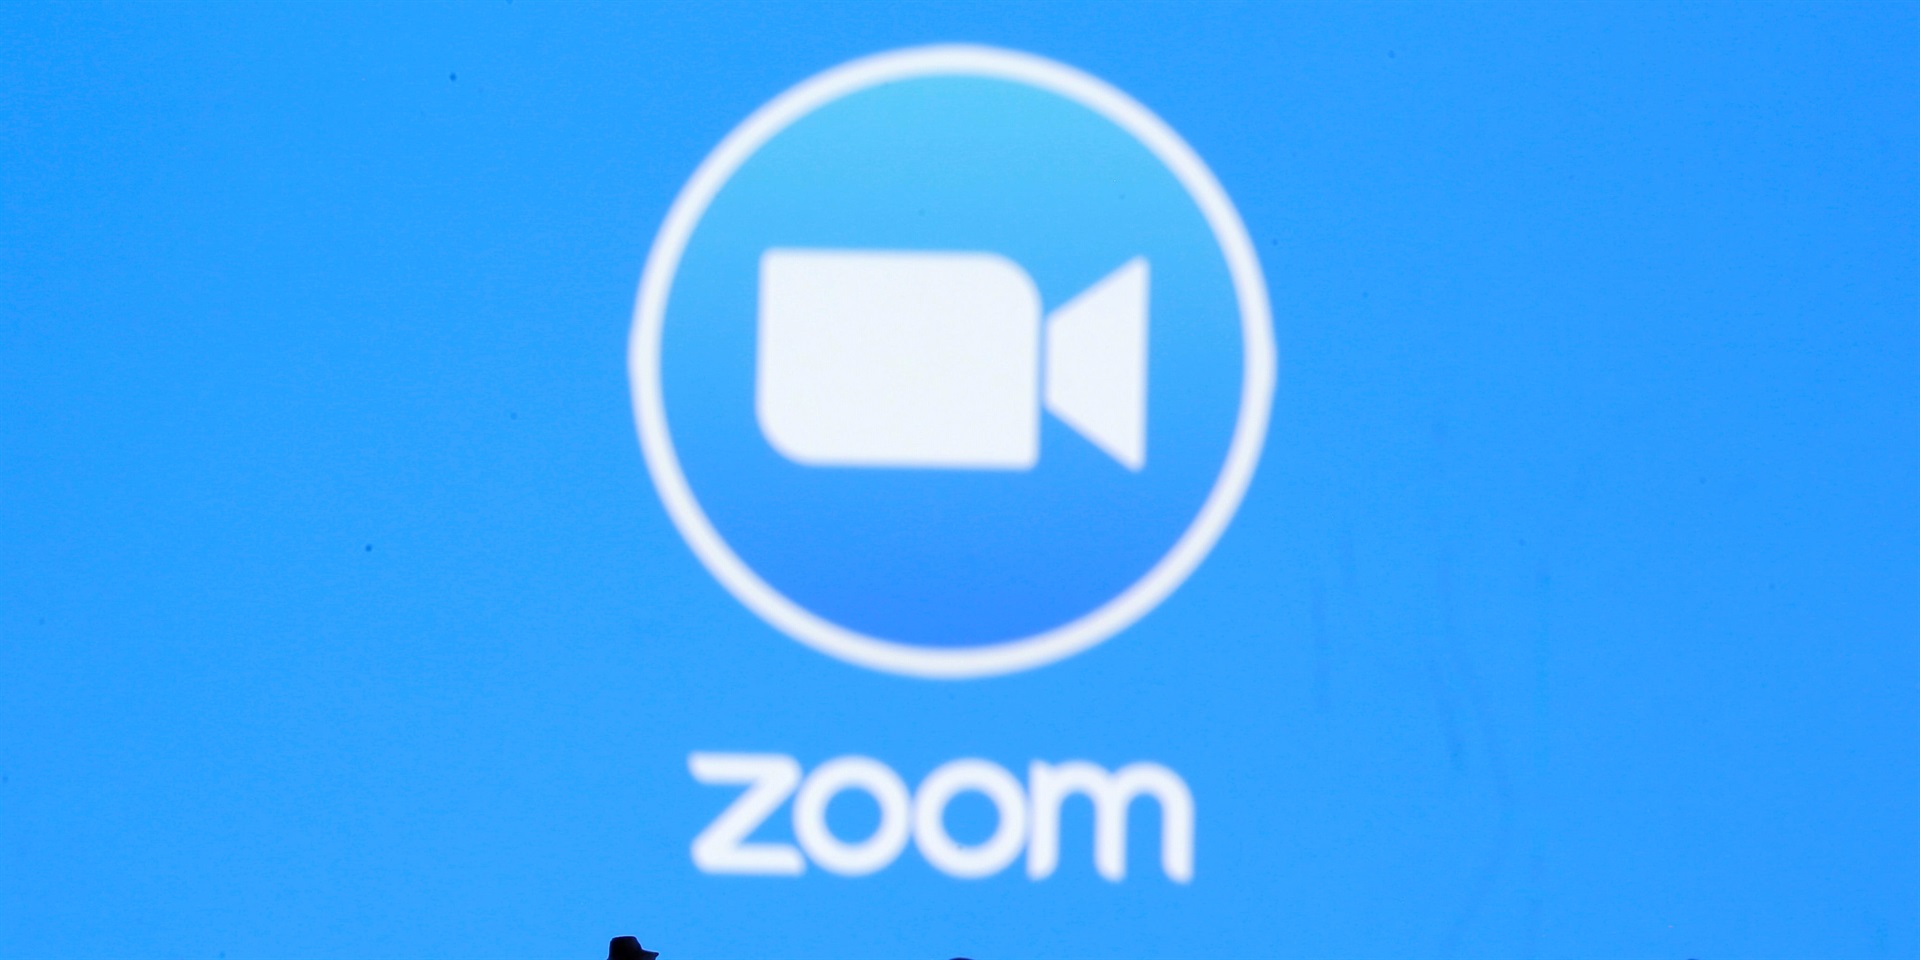 mother shot on zoom call